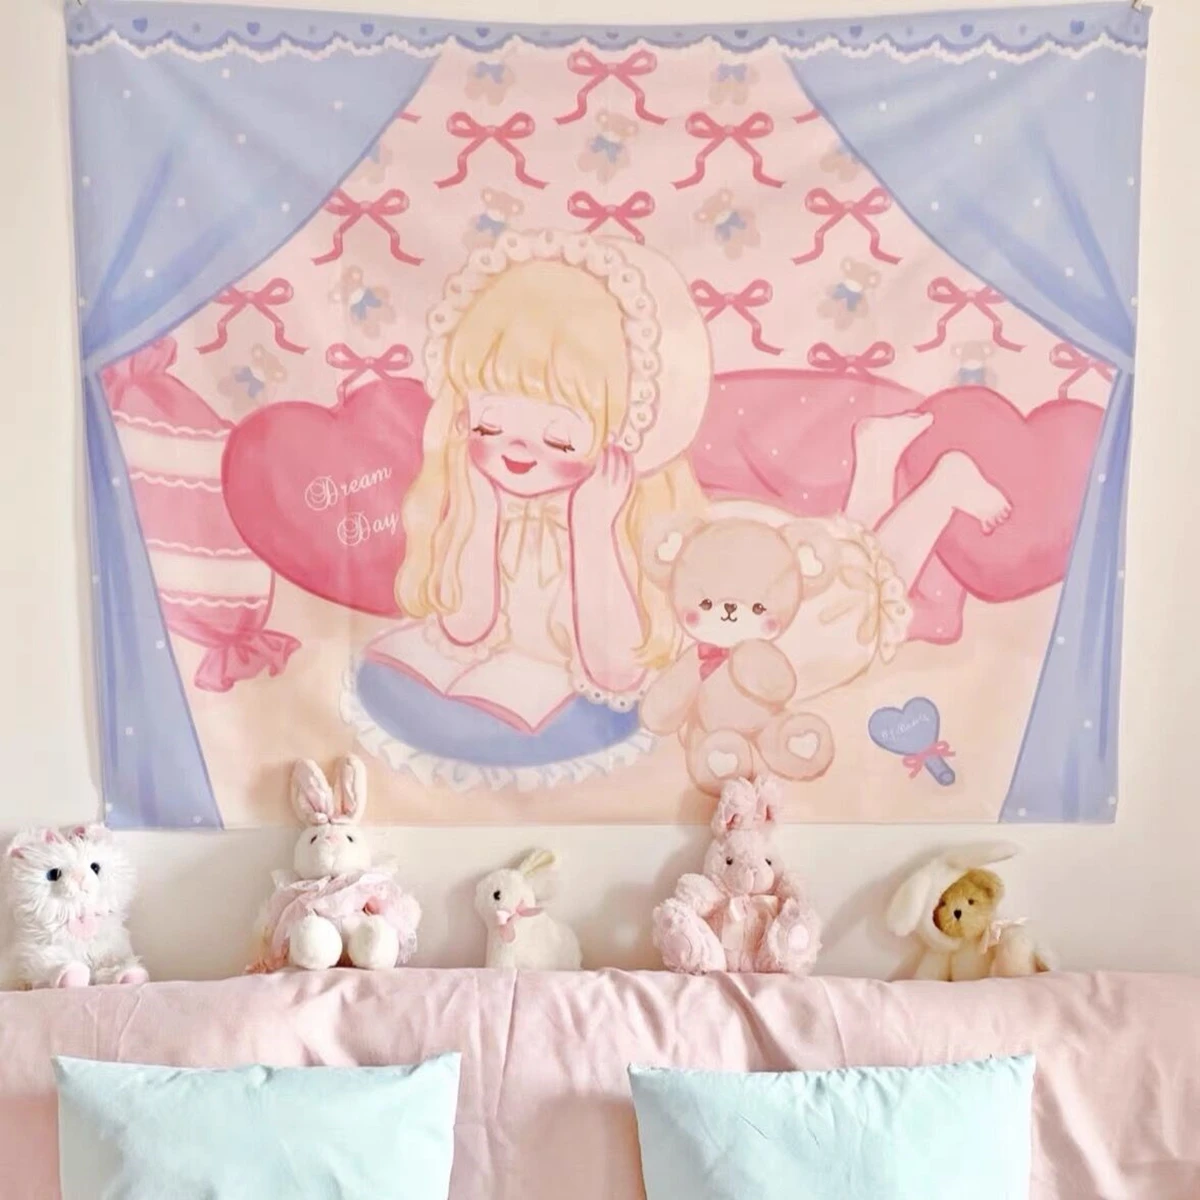 Japanese Decoration Cute Girl Wall Tapestry Anime Kawaii Teen Aesthetic Pink Decor Hanging Tapestries Home Decor AliExpress